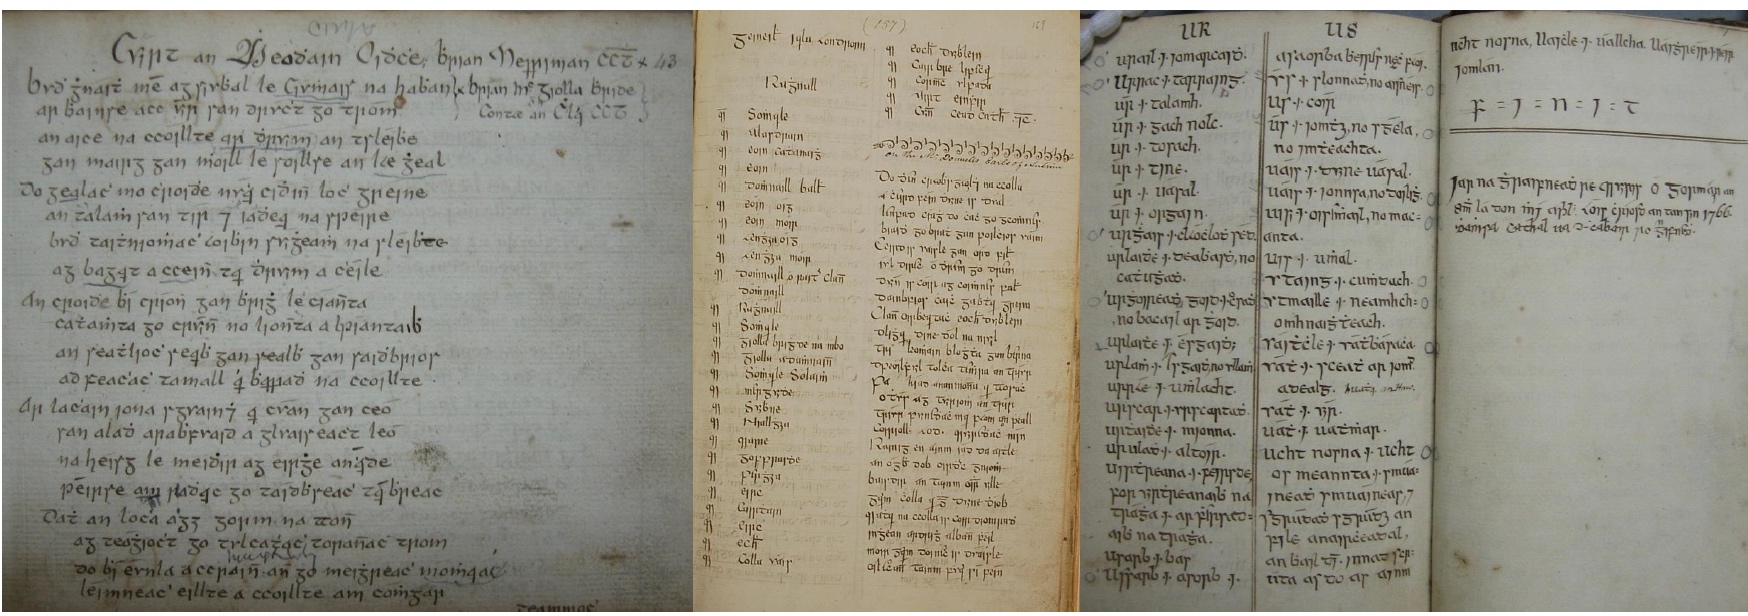 Three images: on the left is an extract from Cuirt an Mhean Oiche (Ms. 40); in the middle is a genealogy (Ms. 1) and on the right is an example of a dictionary (Ms. 20).